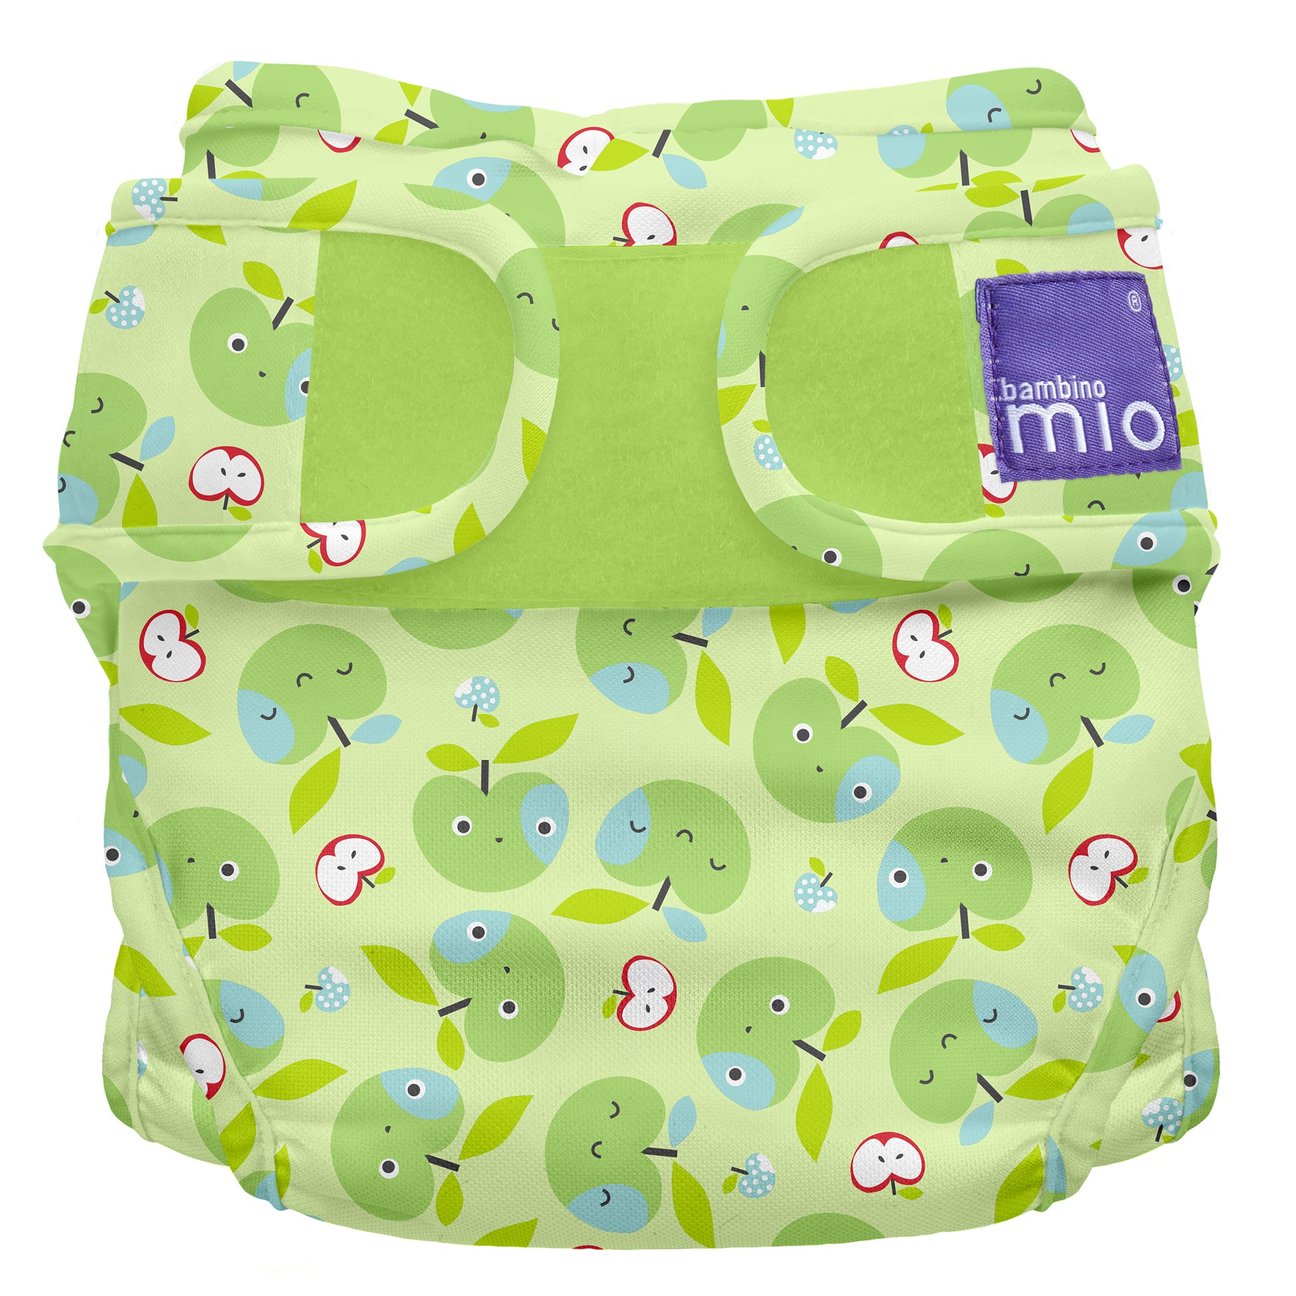 MioDuo Nappy Cover: Size 1